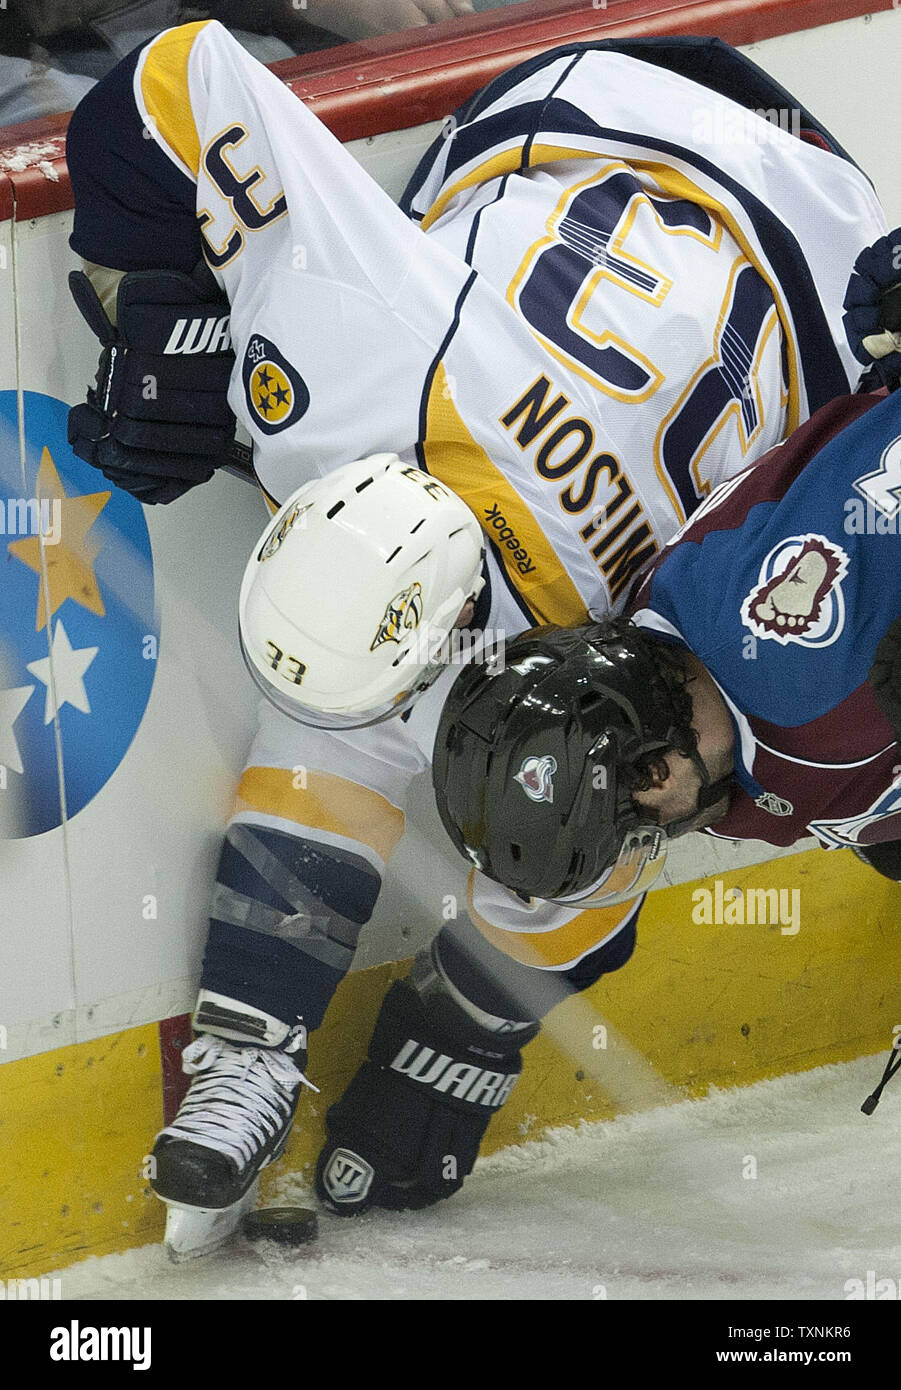 Nashville Predators center Colin Wilson (33) and Colorado Avalanche defenseman Ryan O'Byrne  battle for a loose puck behind the Avalanche goal during the second  period at the Pepsi Center on February 18, 2013 in Denver.   UPI/Gary C. Caskey Stock Photo